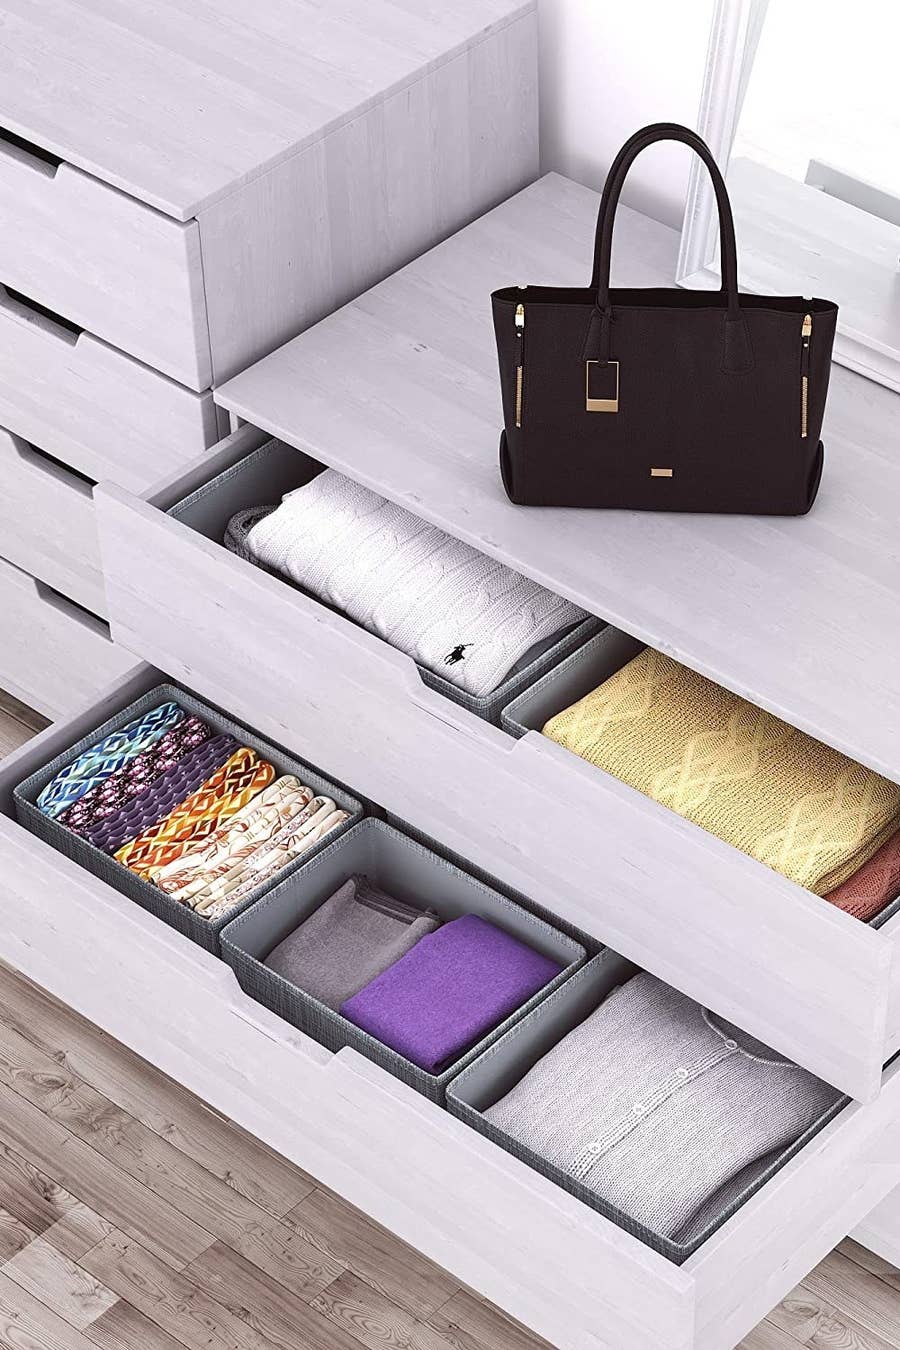 When it comes to organizing drawers there's one fool-proof product